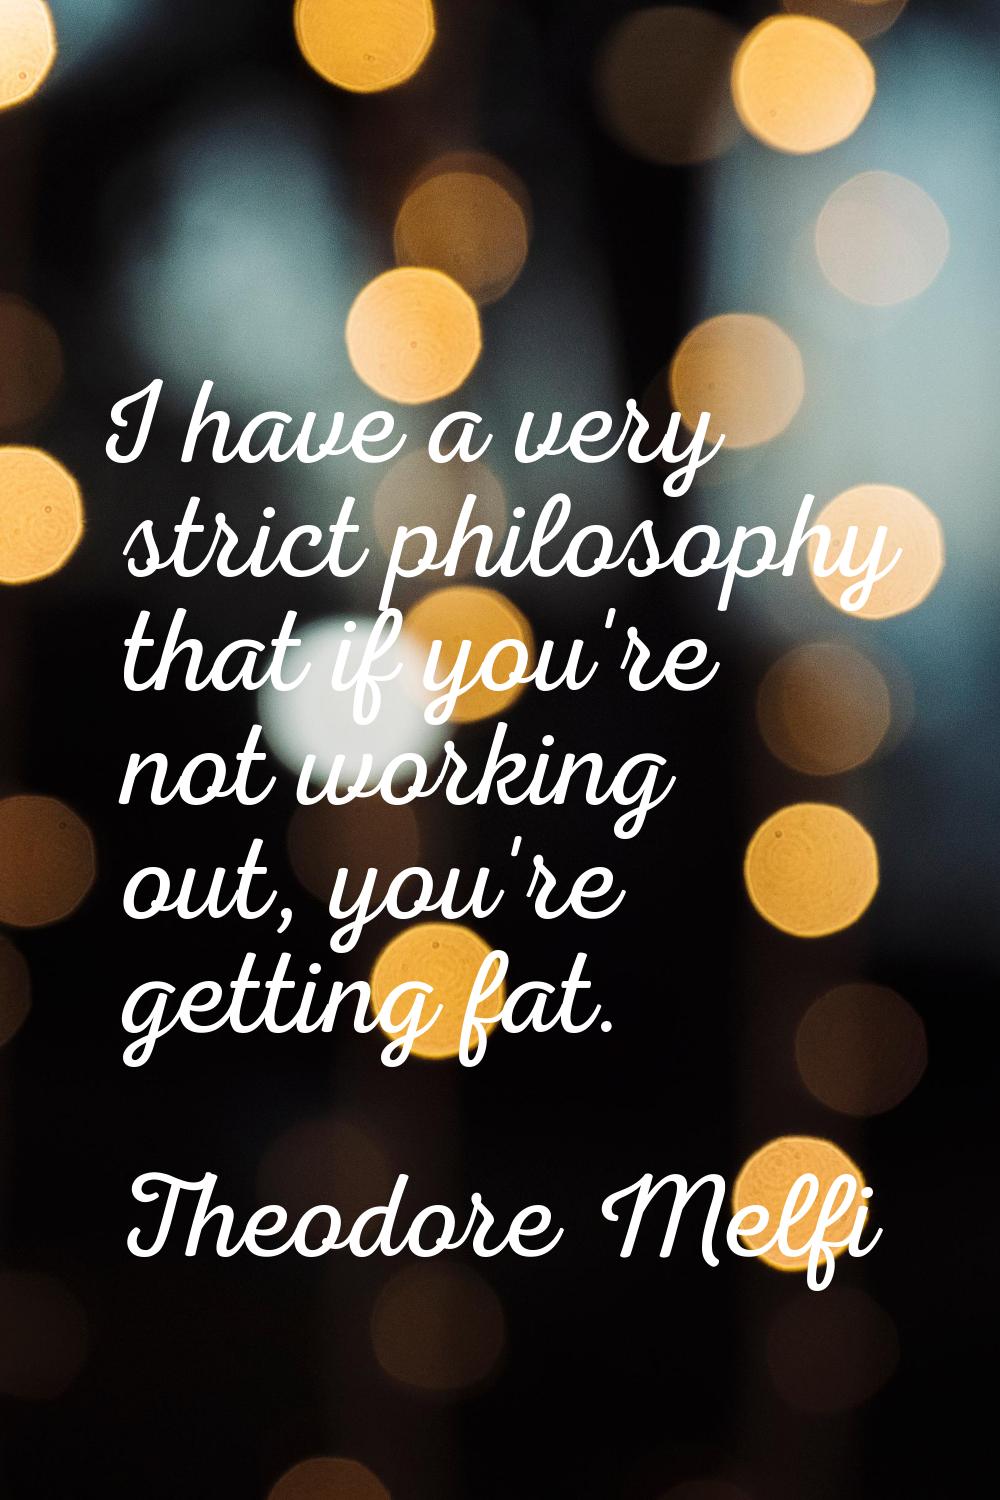 I have a very strict philosophy that if you're not working out, you're getting fat.